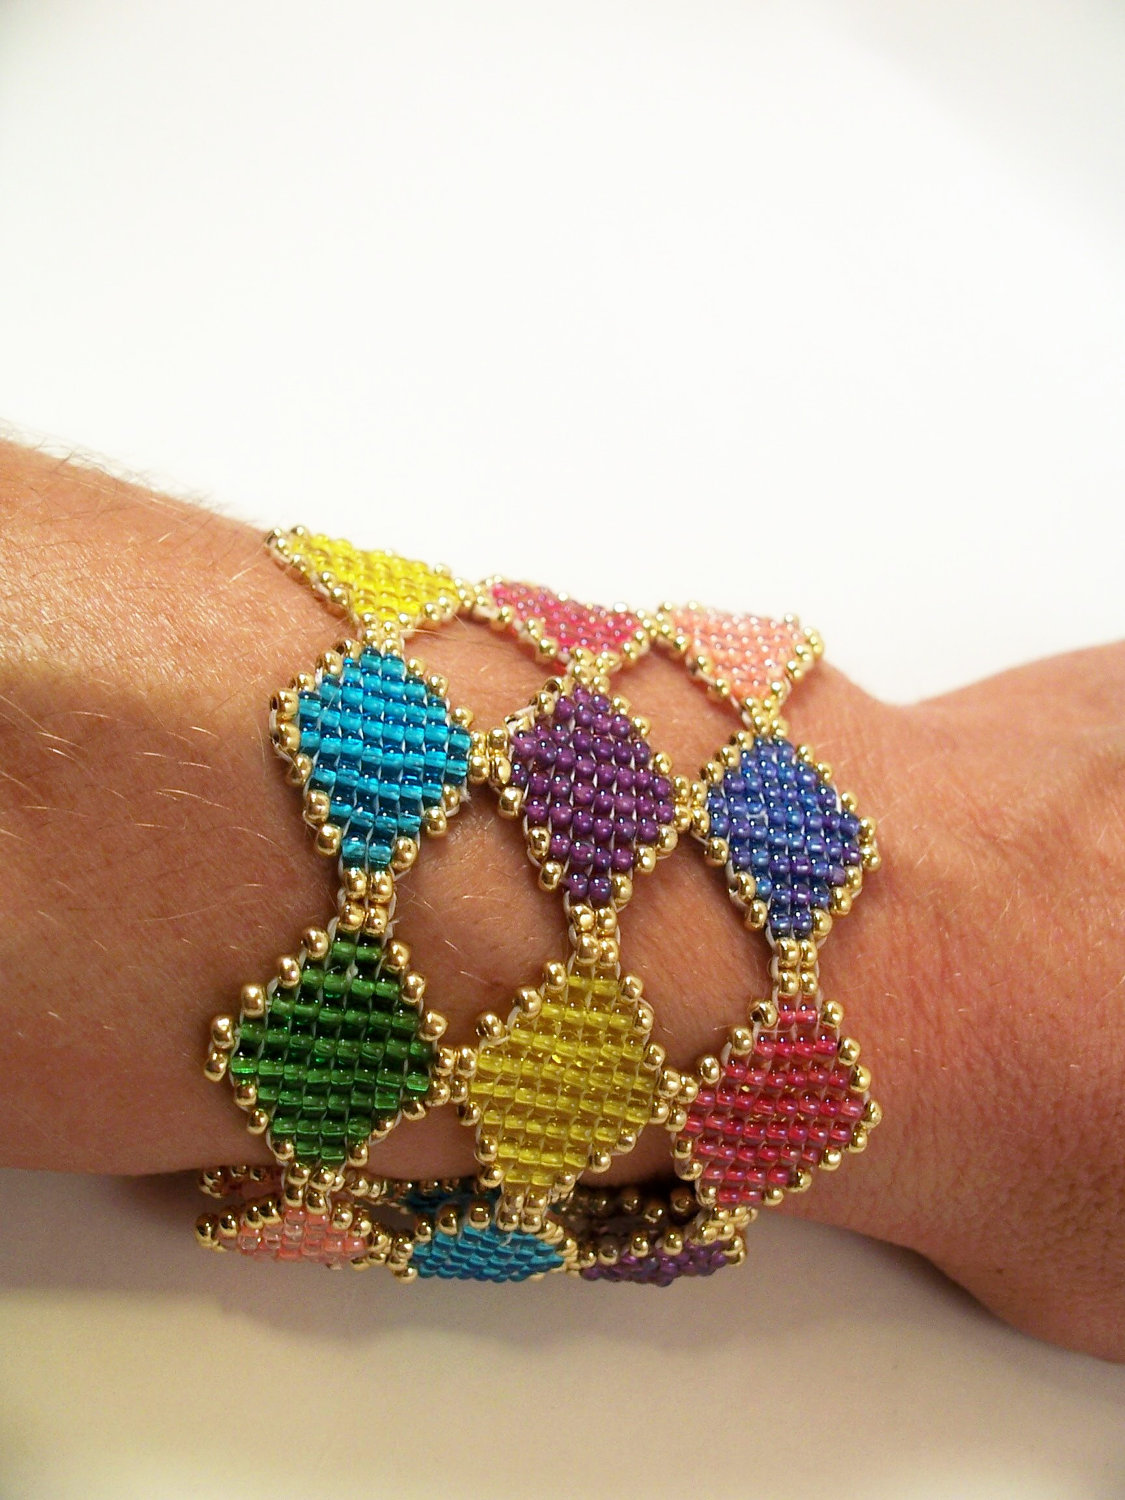 Stained Glass Bracelet Cuff Pattern, Beading Tutorial In Pdf